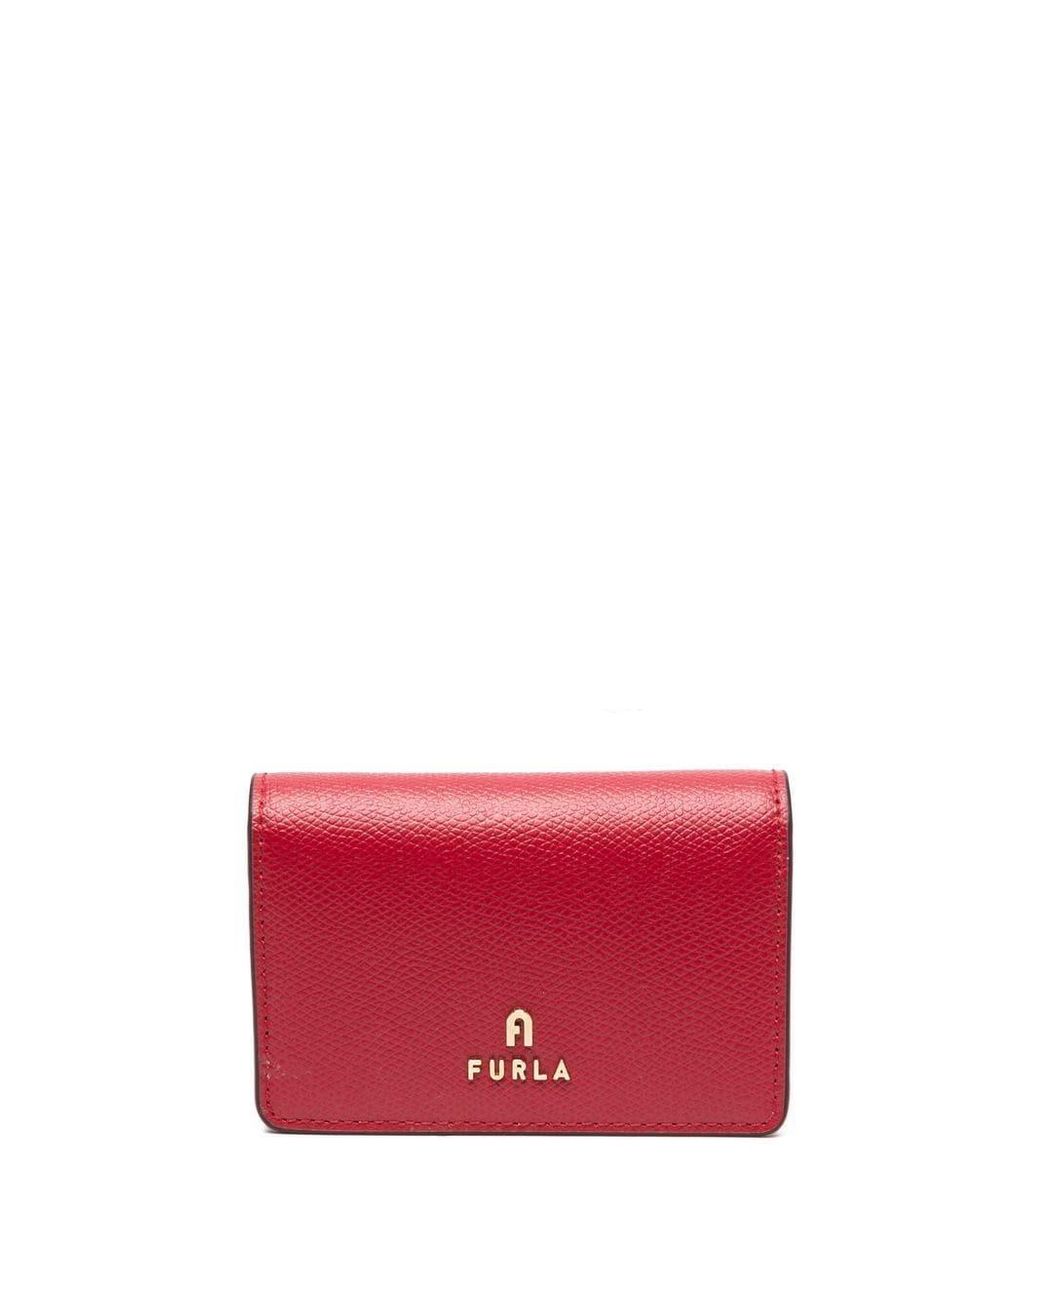 Furla Small Camelia Leather Purse in Red | Lyst